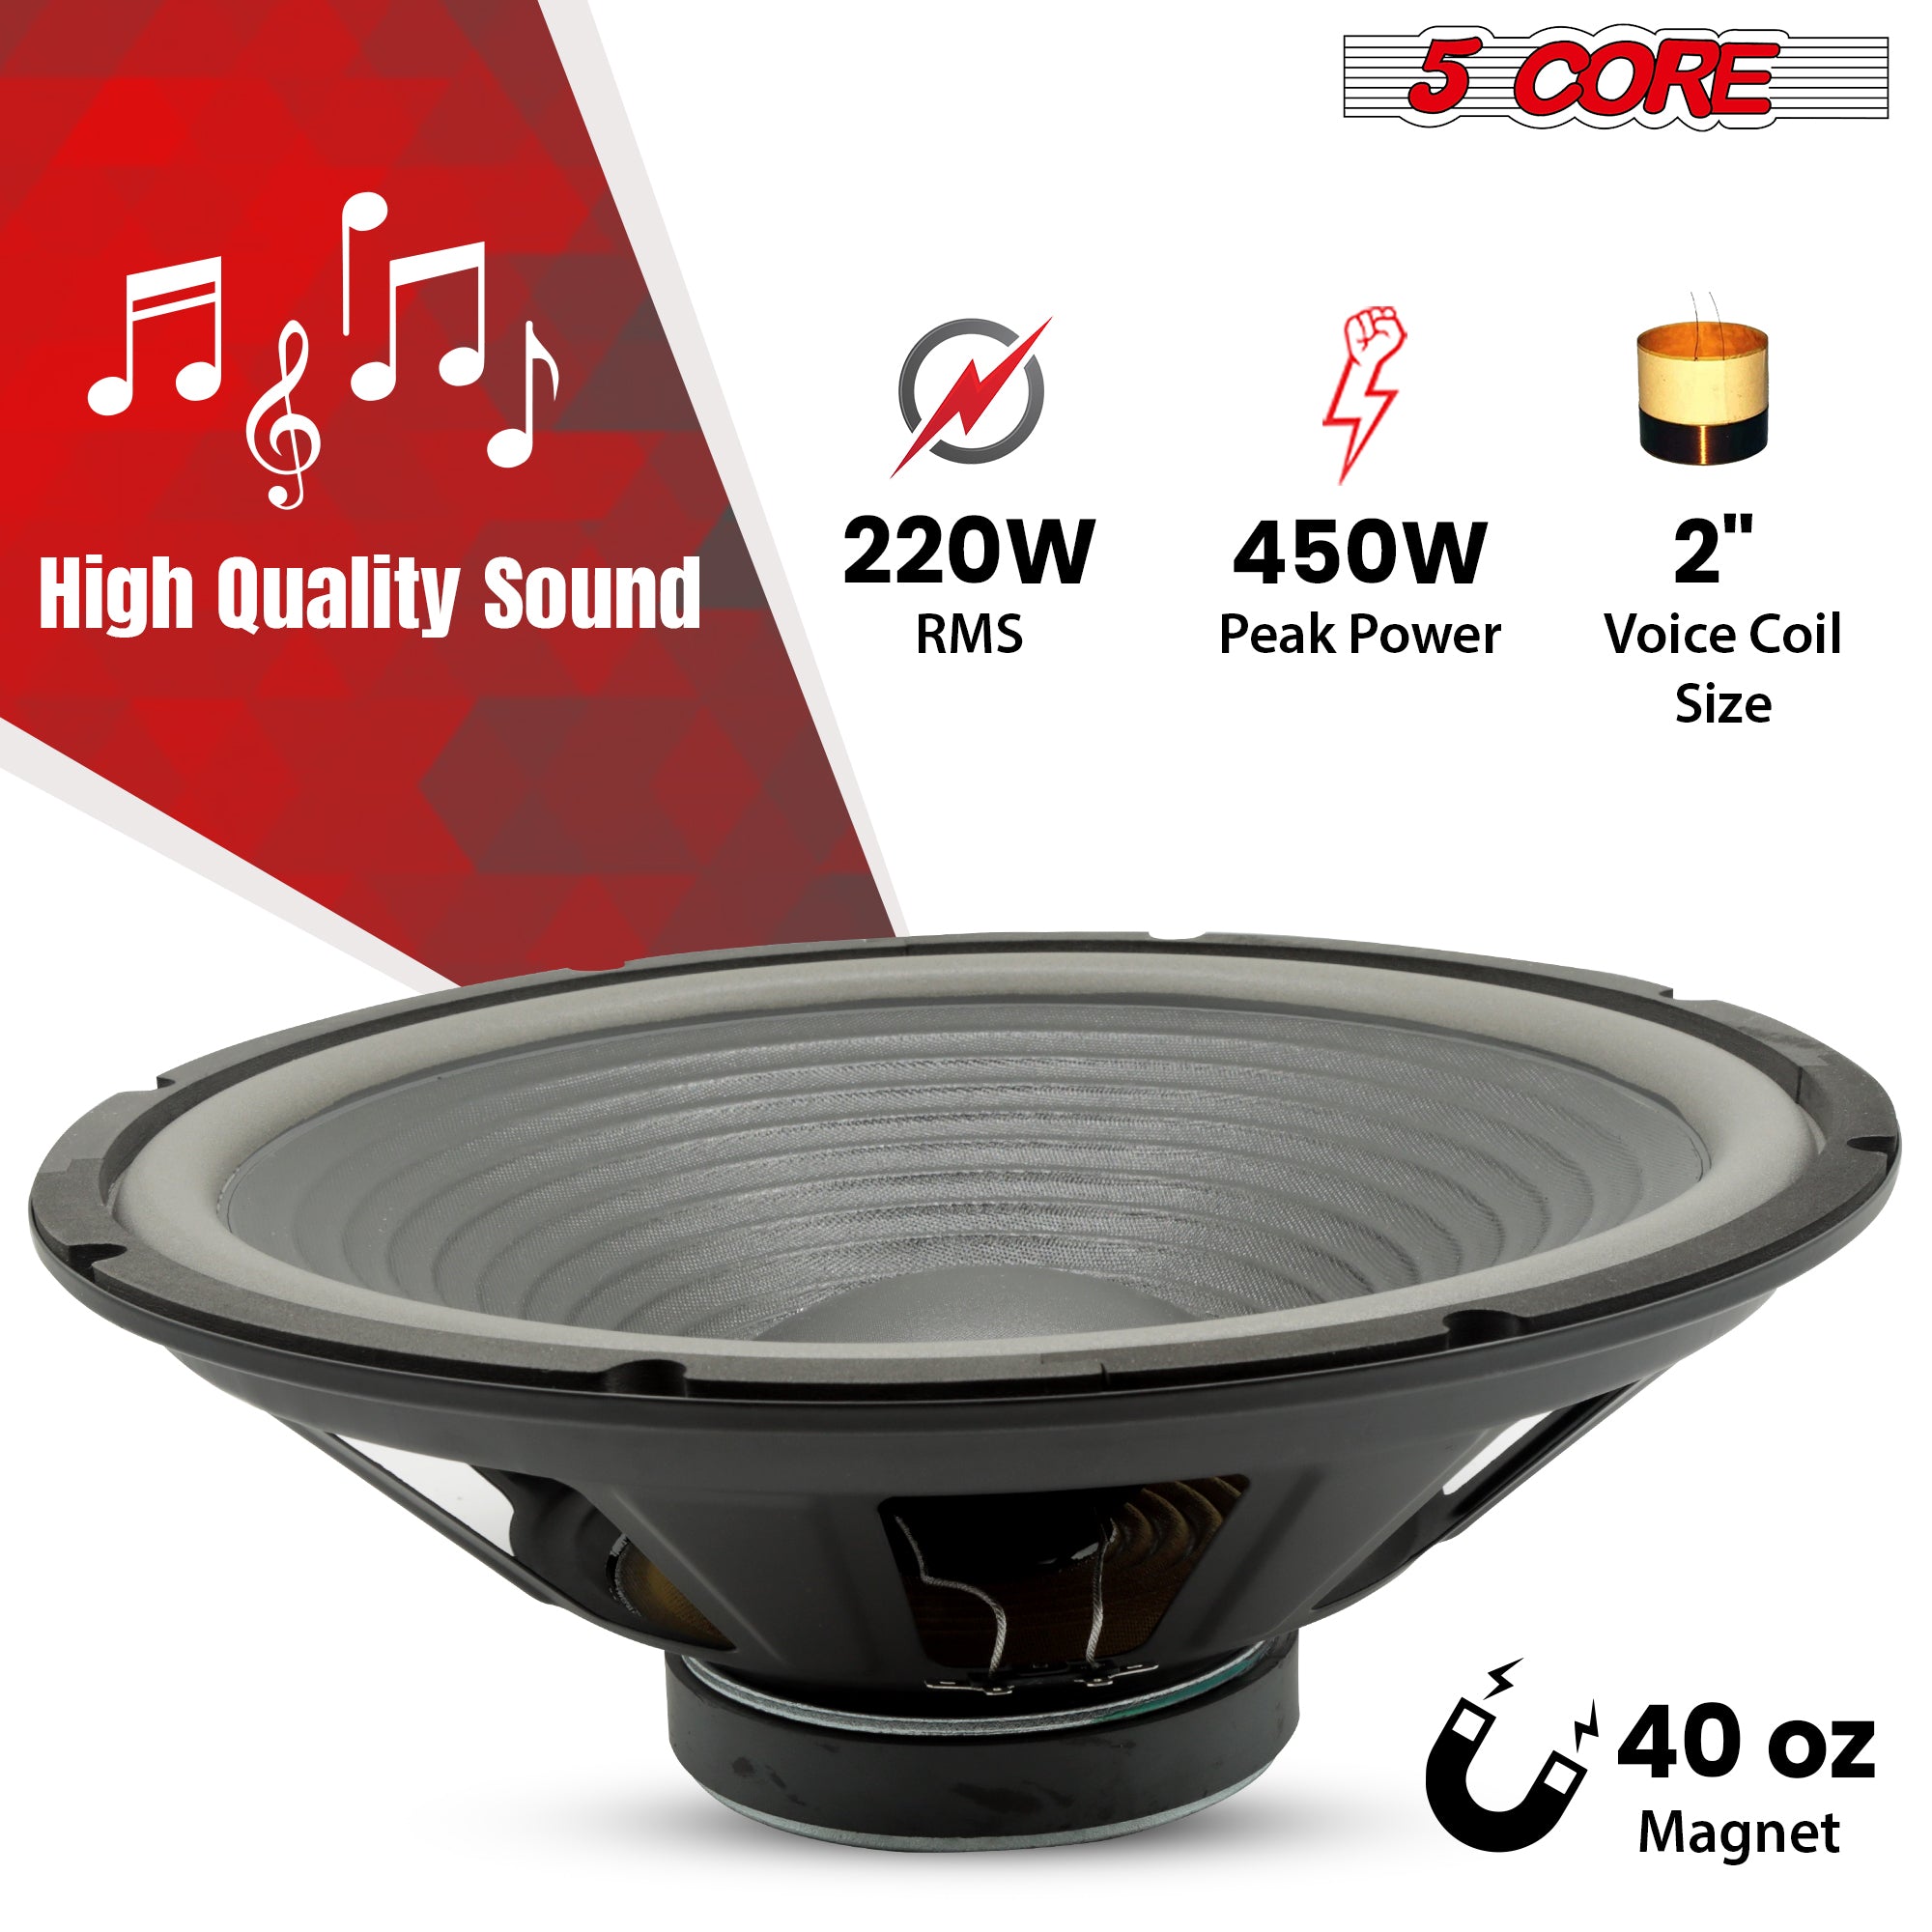 Replacement bass subwoofer featuring a 450W max power rating and 4-ohm impedance.